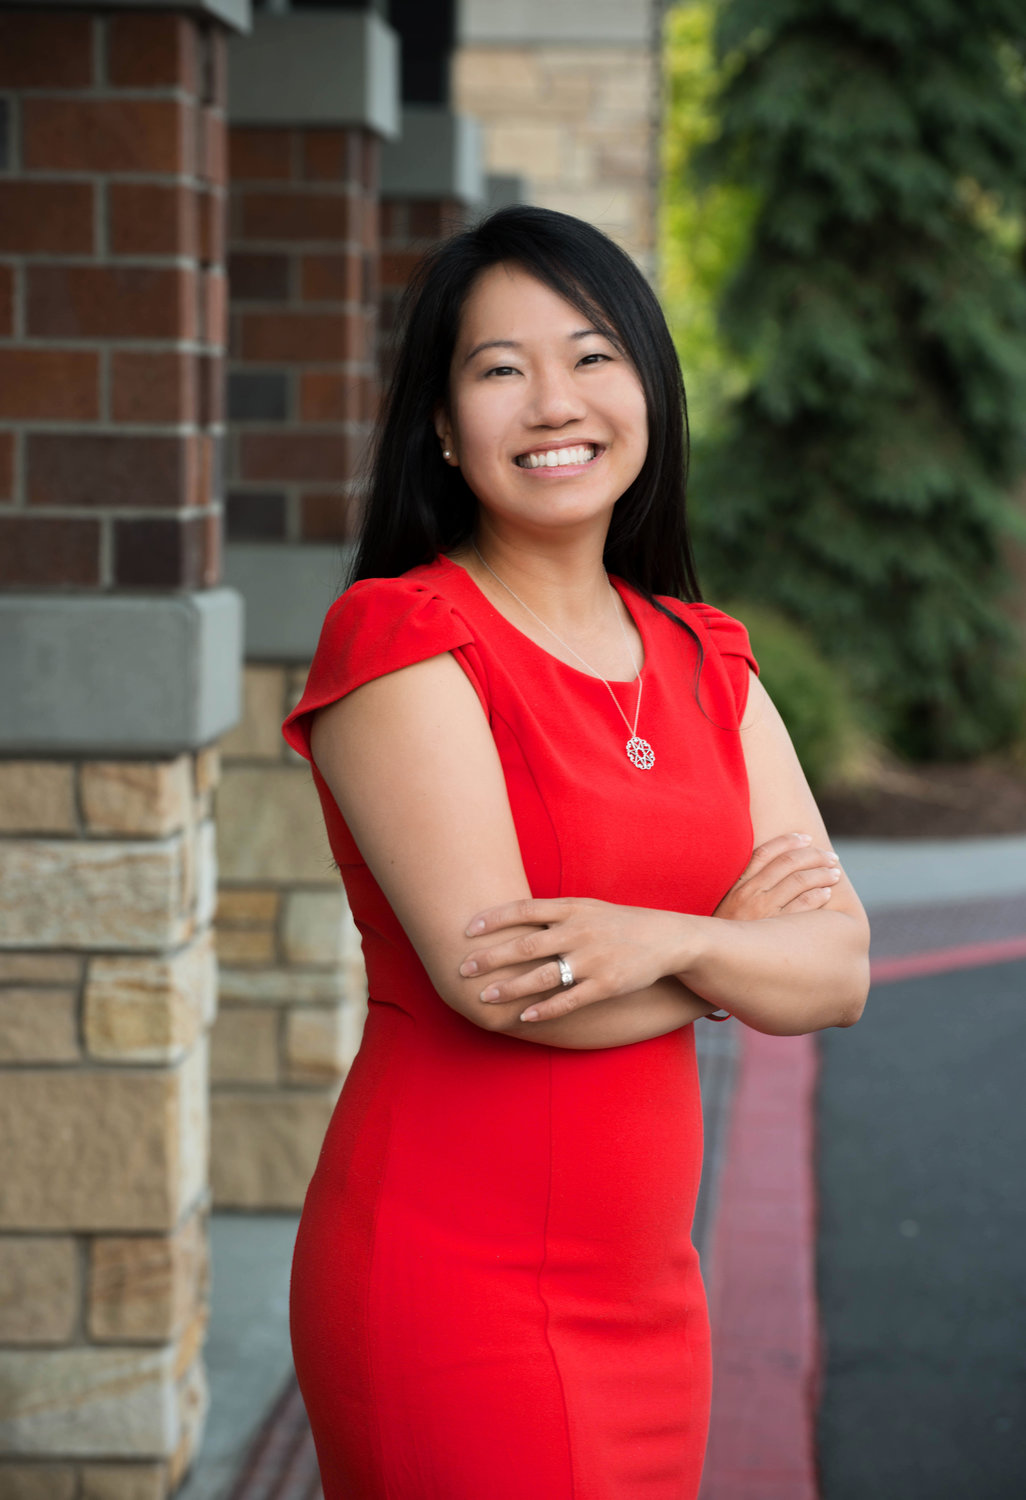 Dr. Lynda Tang is a physician at The Vancouver Clinic specializing in palliative care and hospice medicine.